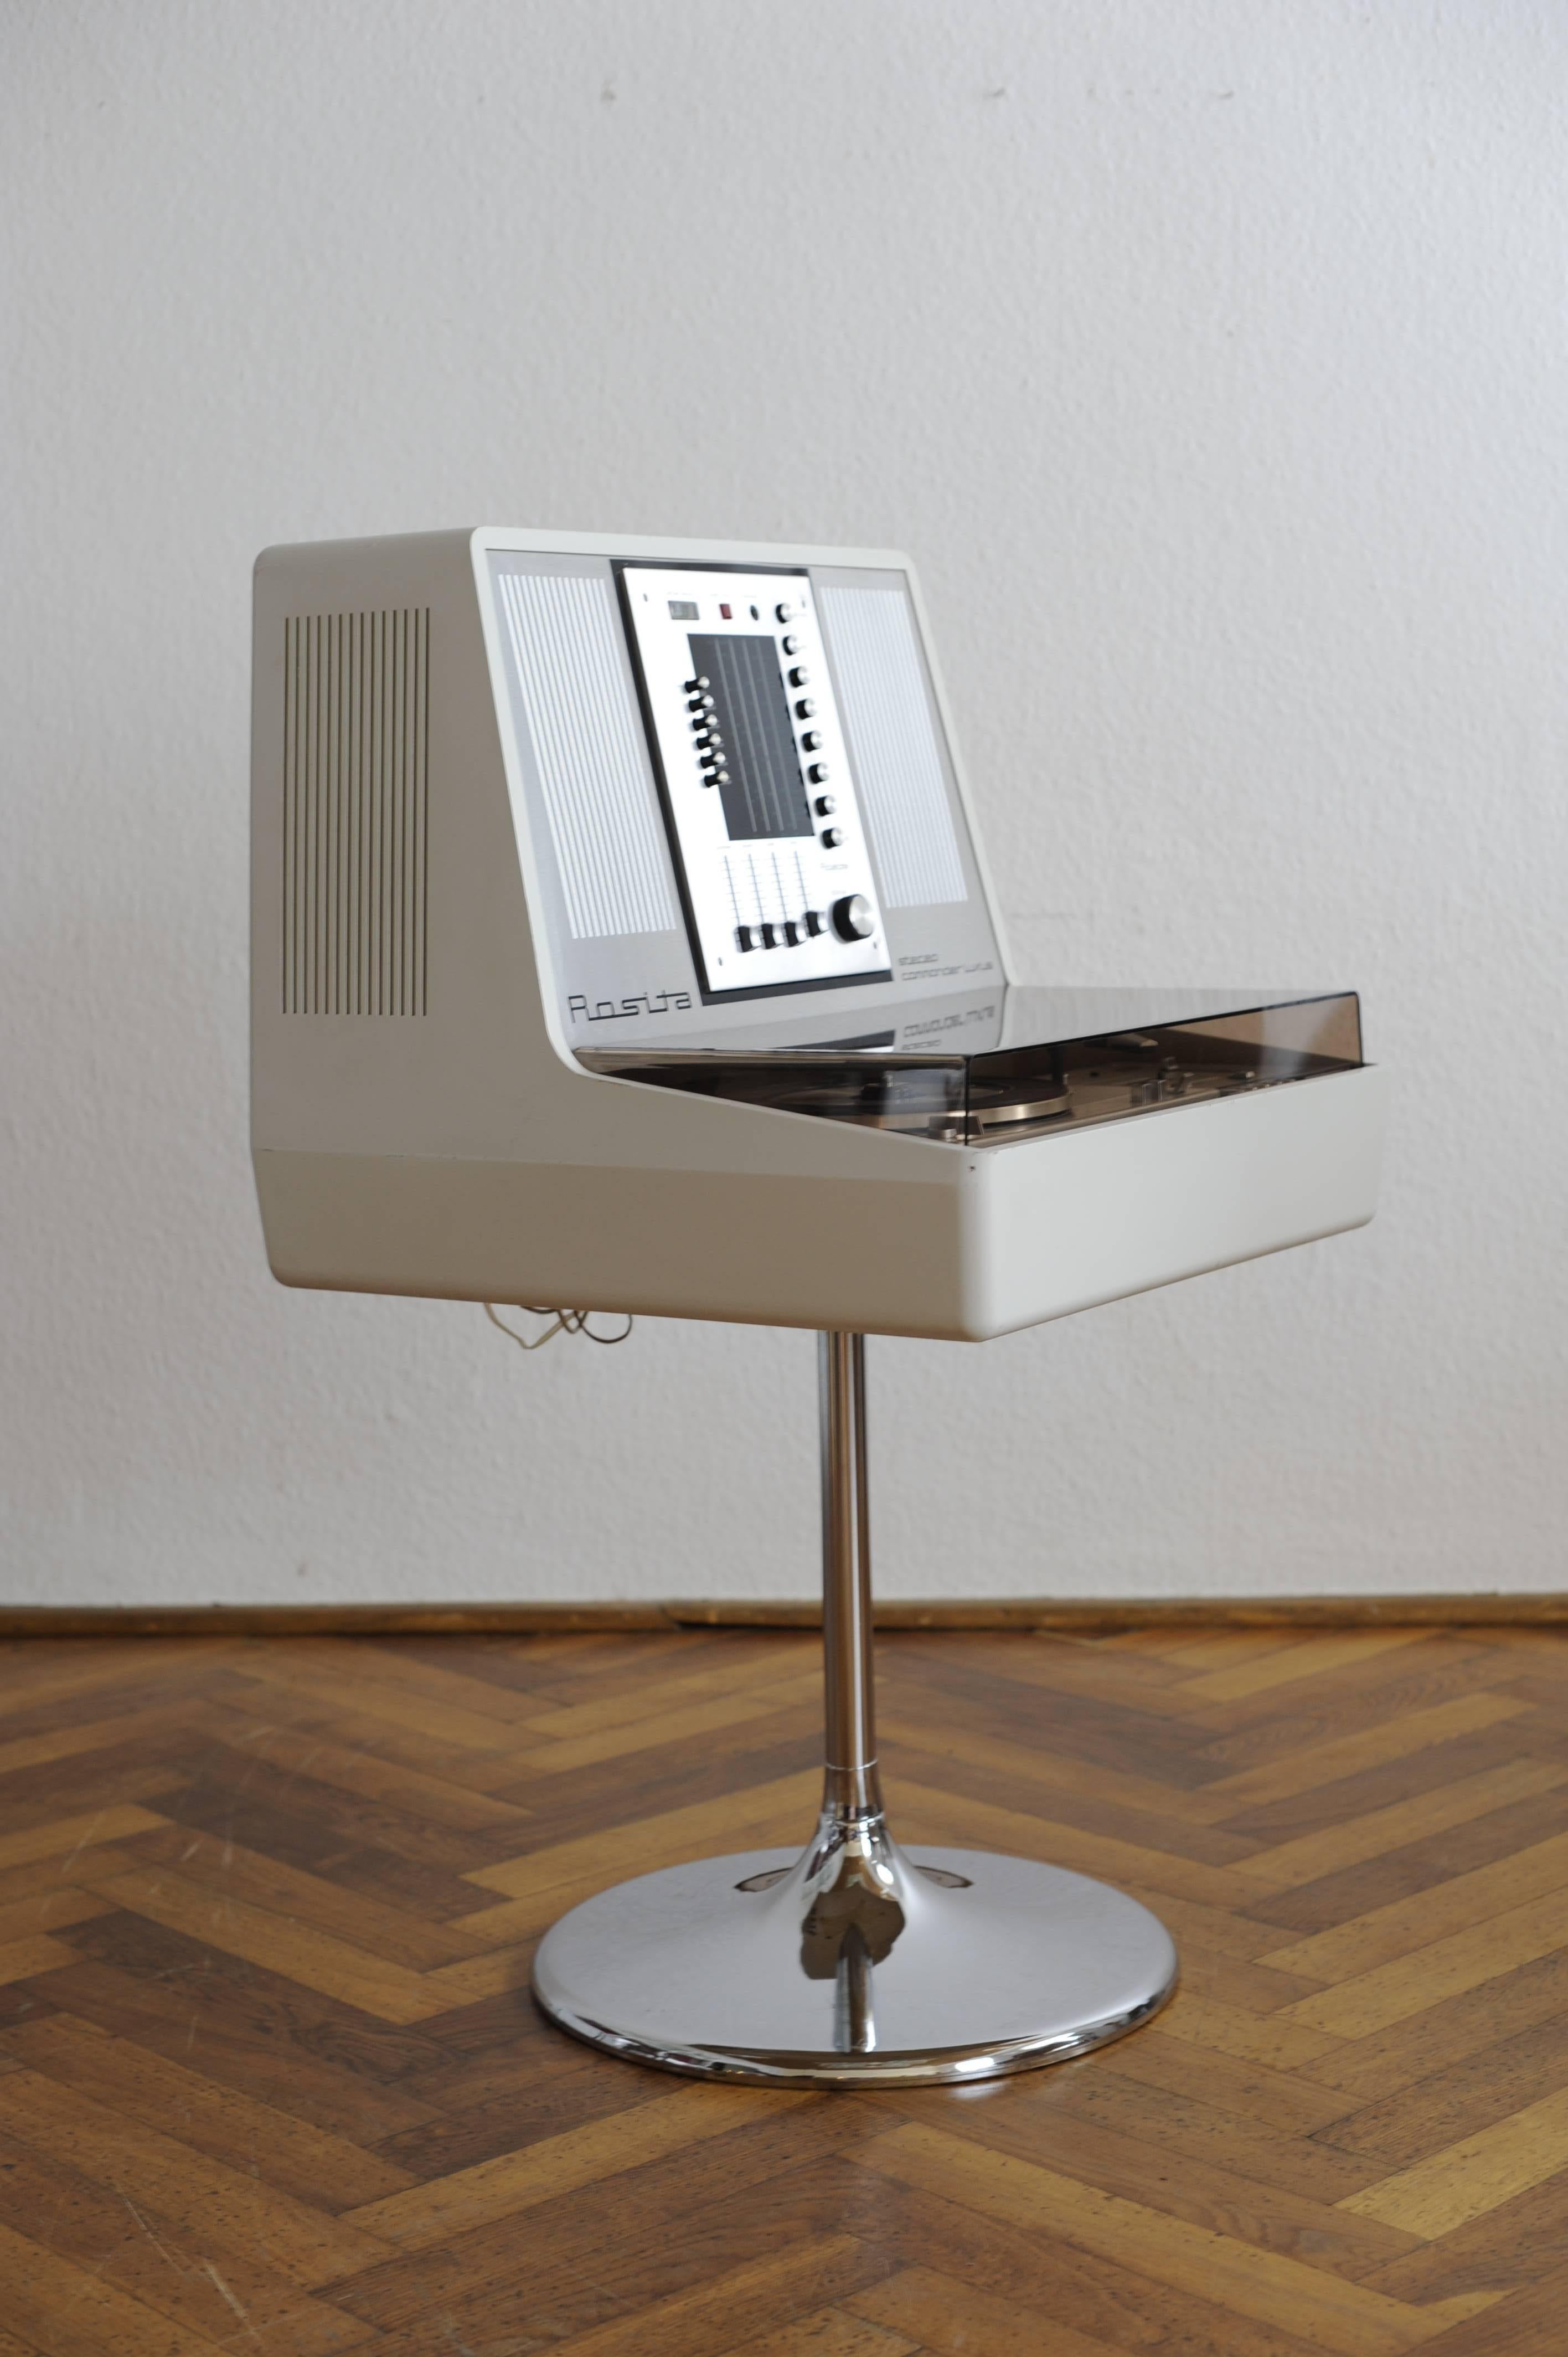 Attention, all you design high fidelity system fanatics!
We are offing is this extremly stylish and cool looking white Rosita stereo hifi record player radio receiver stereo system on this very cool chrome tulip stand.
This is definitely the